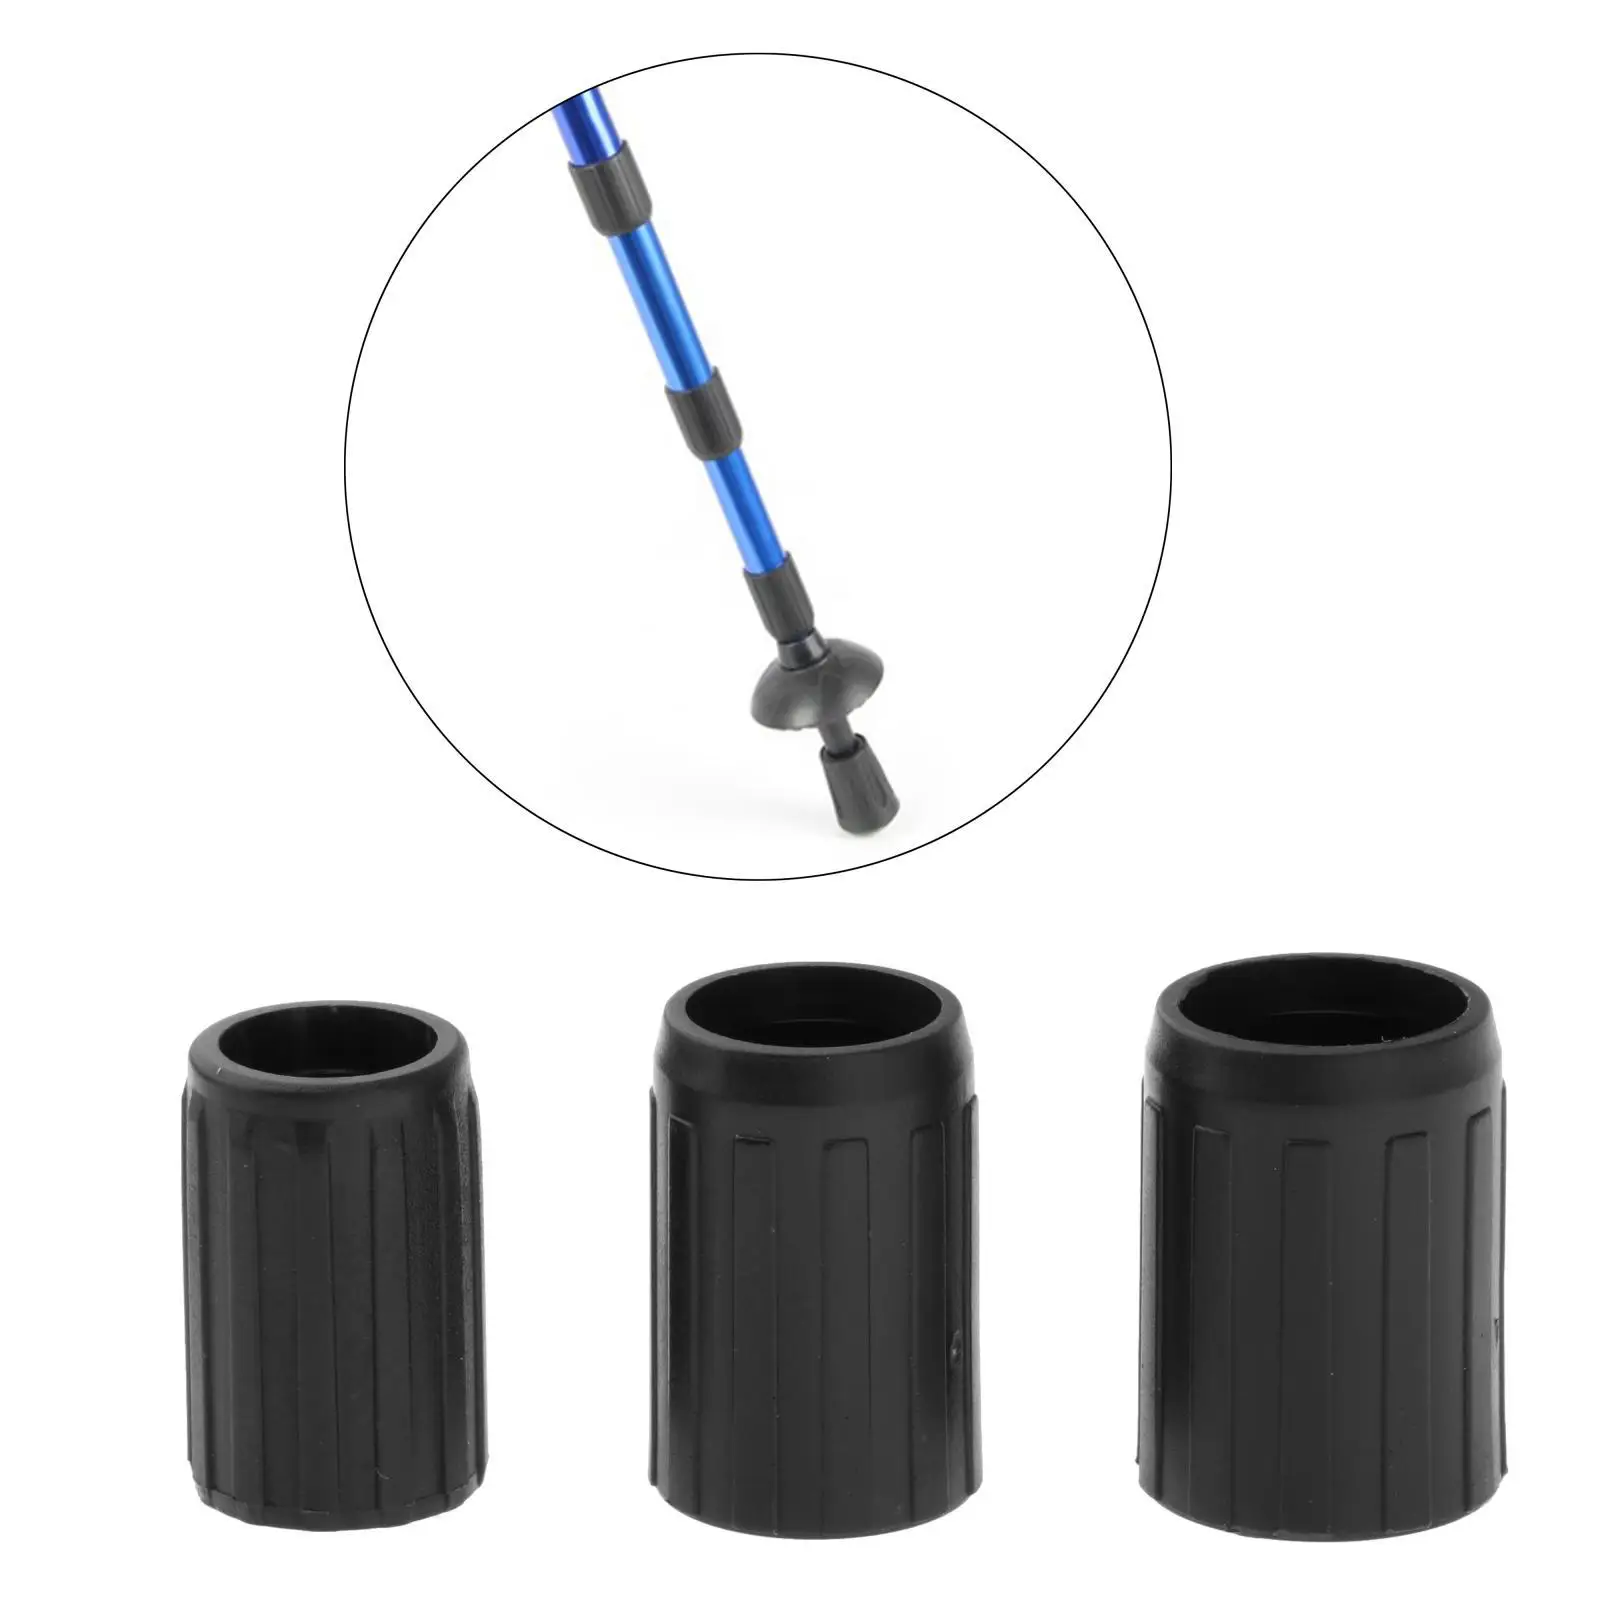 Trekking Pole Tip Mud Support Shock Absorbing Non Slip Replacement Protective Cover Rubber Feet for Walking Poles Equipment